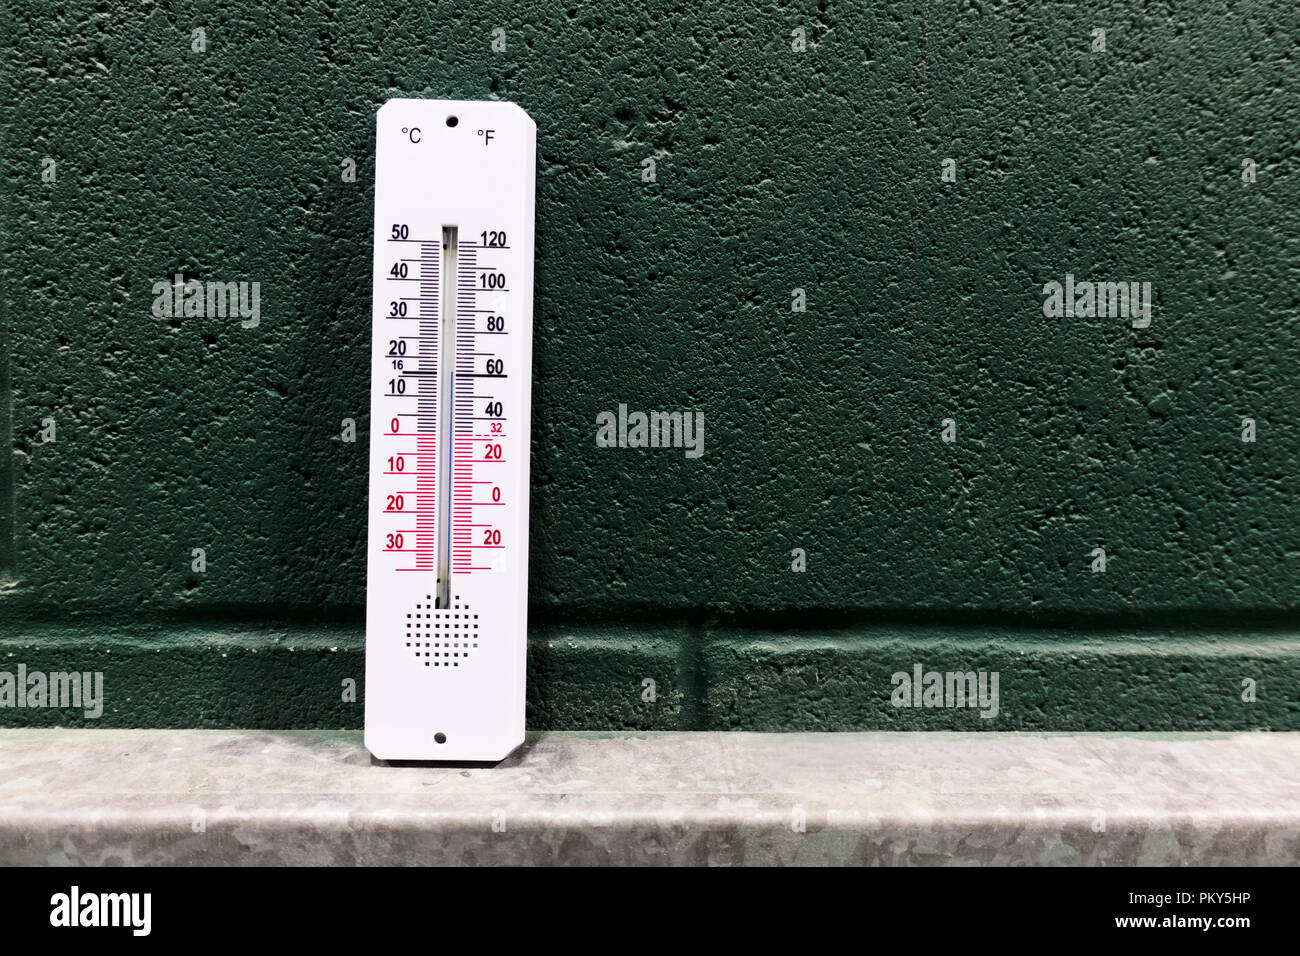 https://c8.alamy.com/comp/PKY5HP/thermometer-close-up-against-green-wall-giving-outdoor-temperature-PKY5HP.jpg